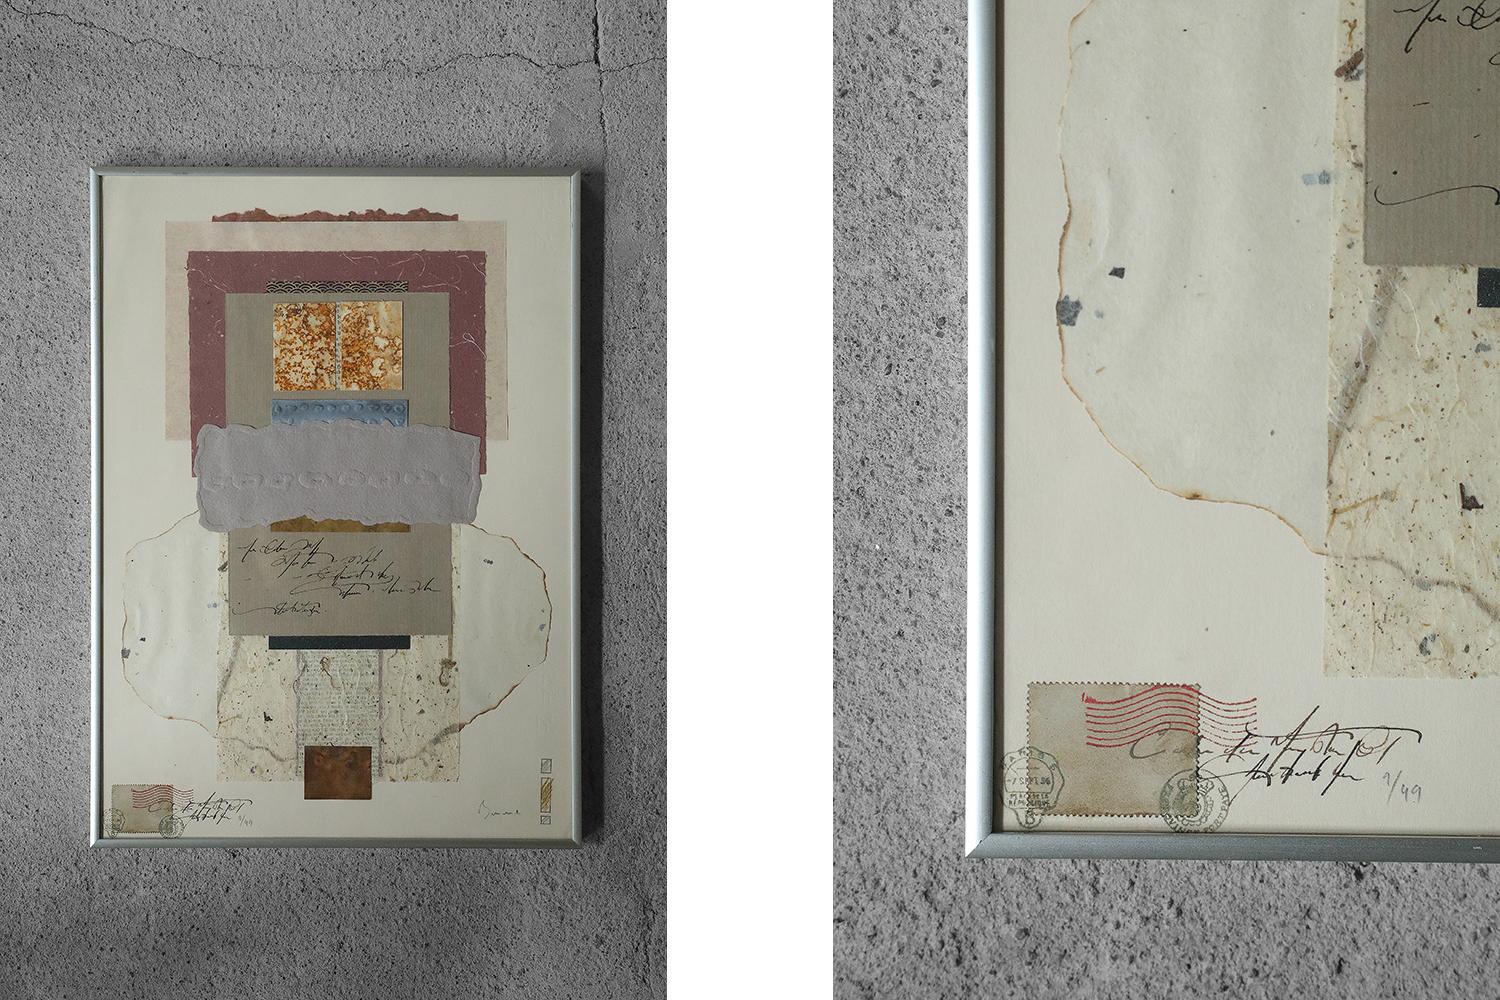 Author unknown, Composition
Color lithograph on Fabriano paper
Number 9/49
The work is signed by the artist and has an individual number
Work dimensions 50/36
Framed work

Fabriano Artistico watercolor paper is molded, made of 100% cotton, chlorine